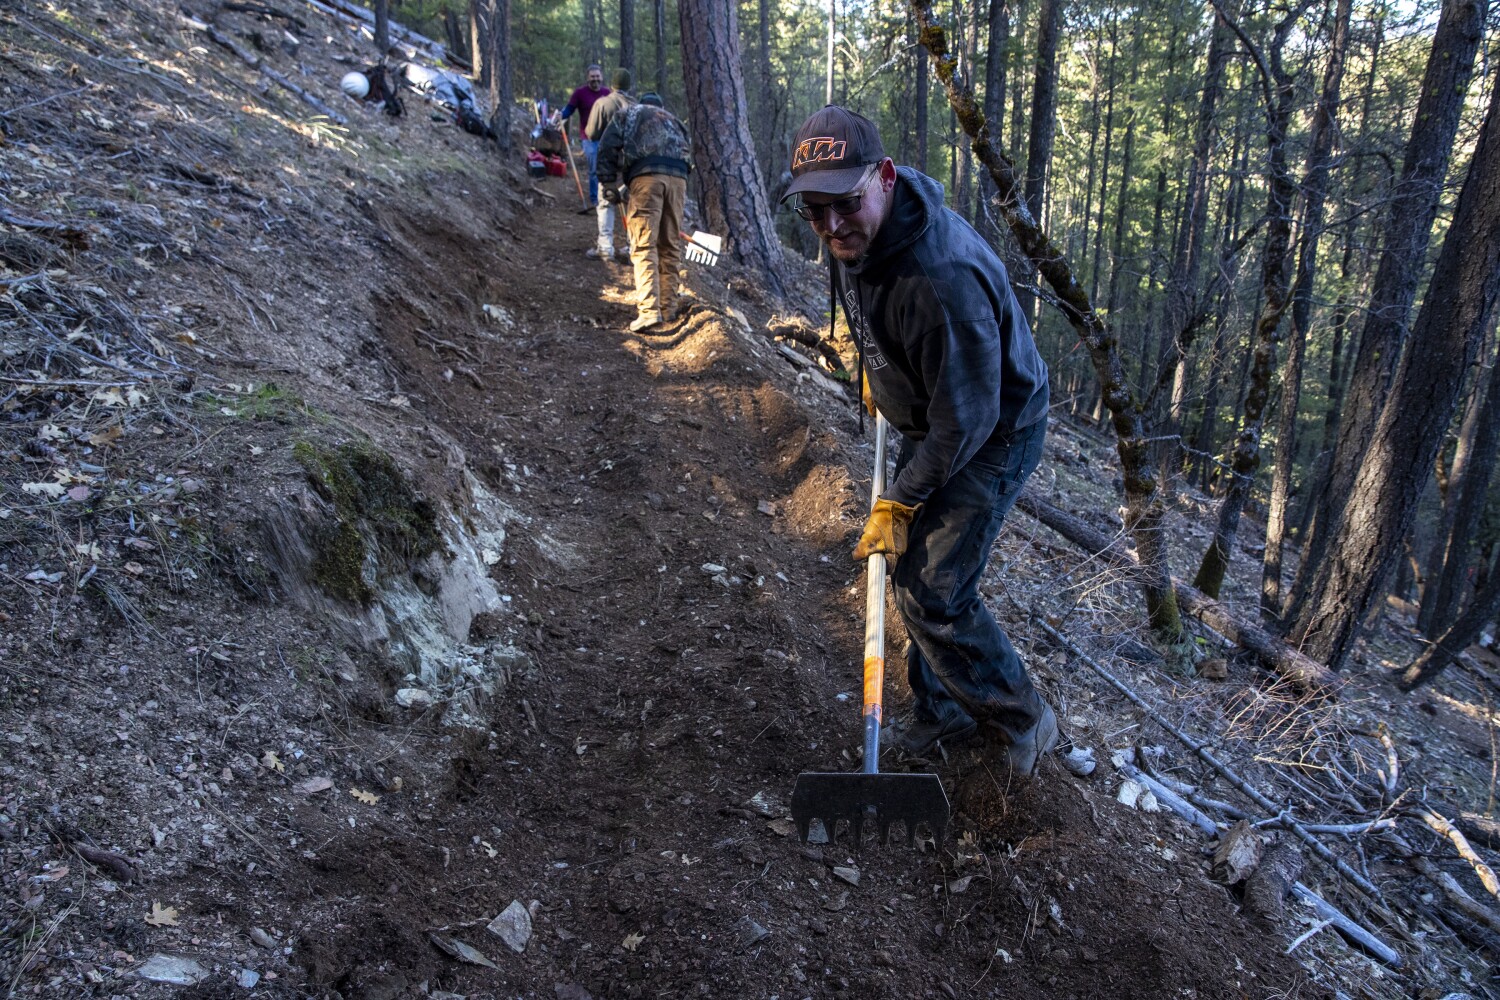 'We have to remake ourselves': Can a new trail help revive this crest of the Sierra?